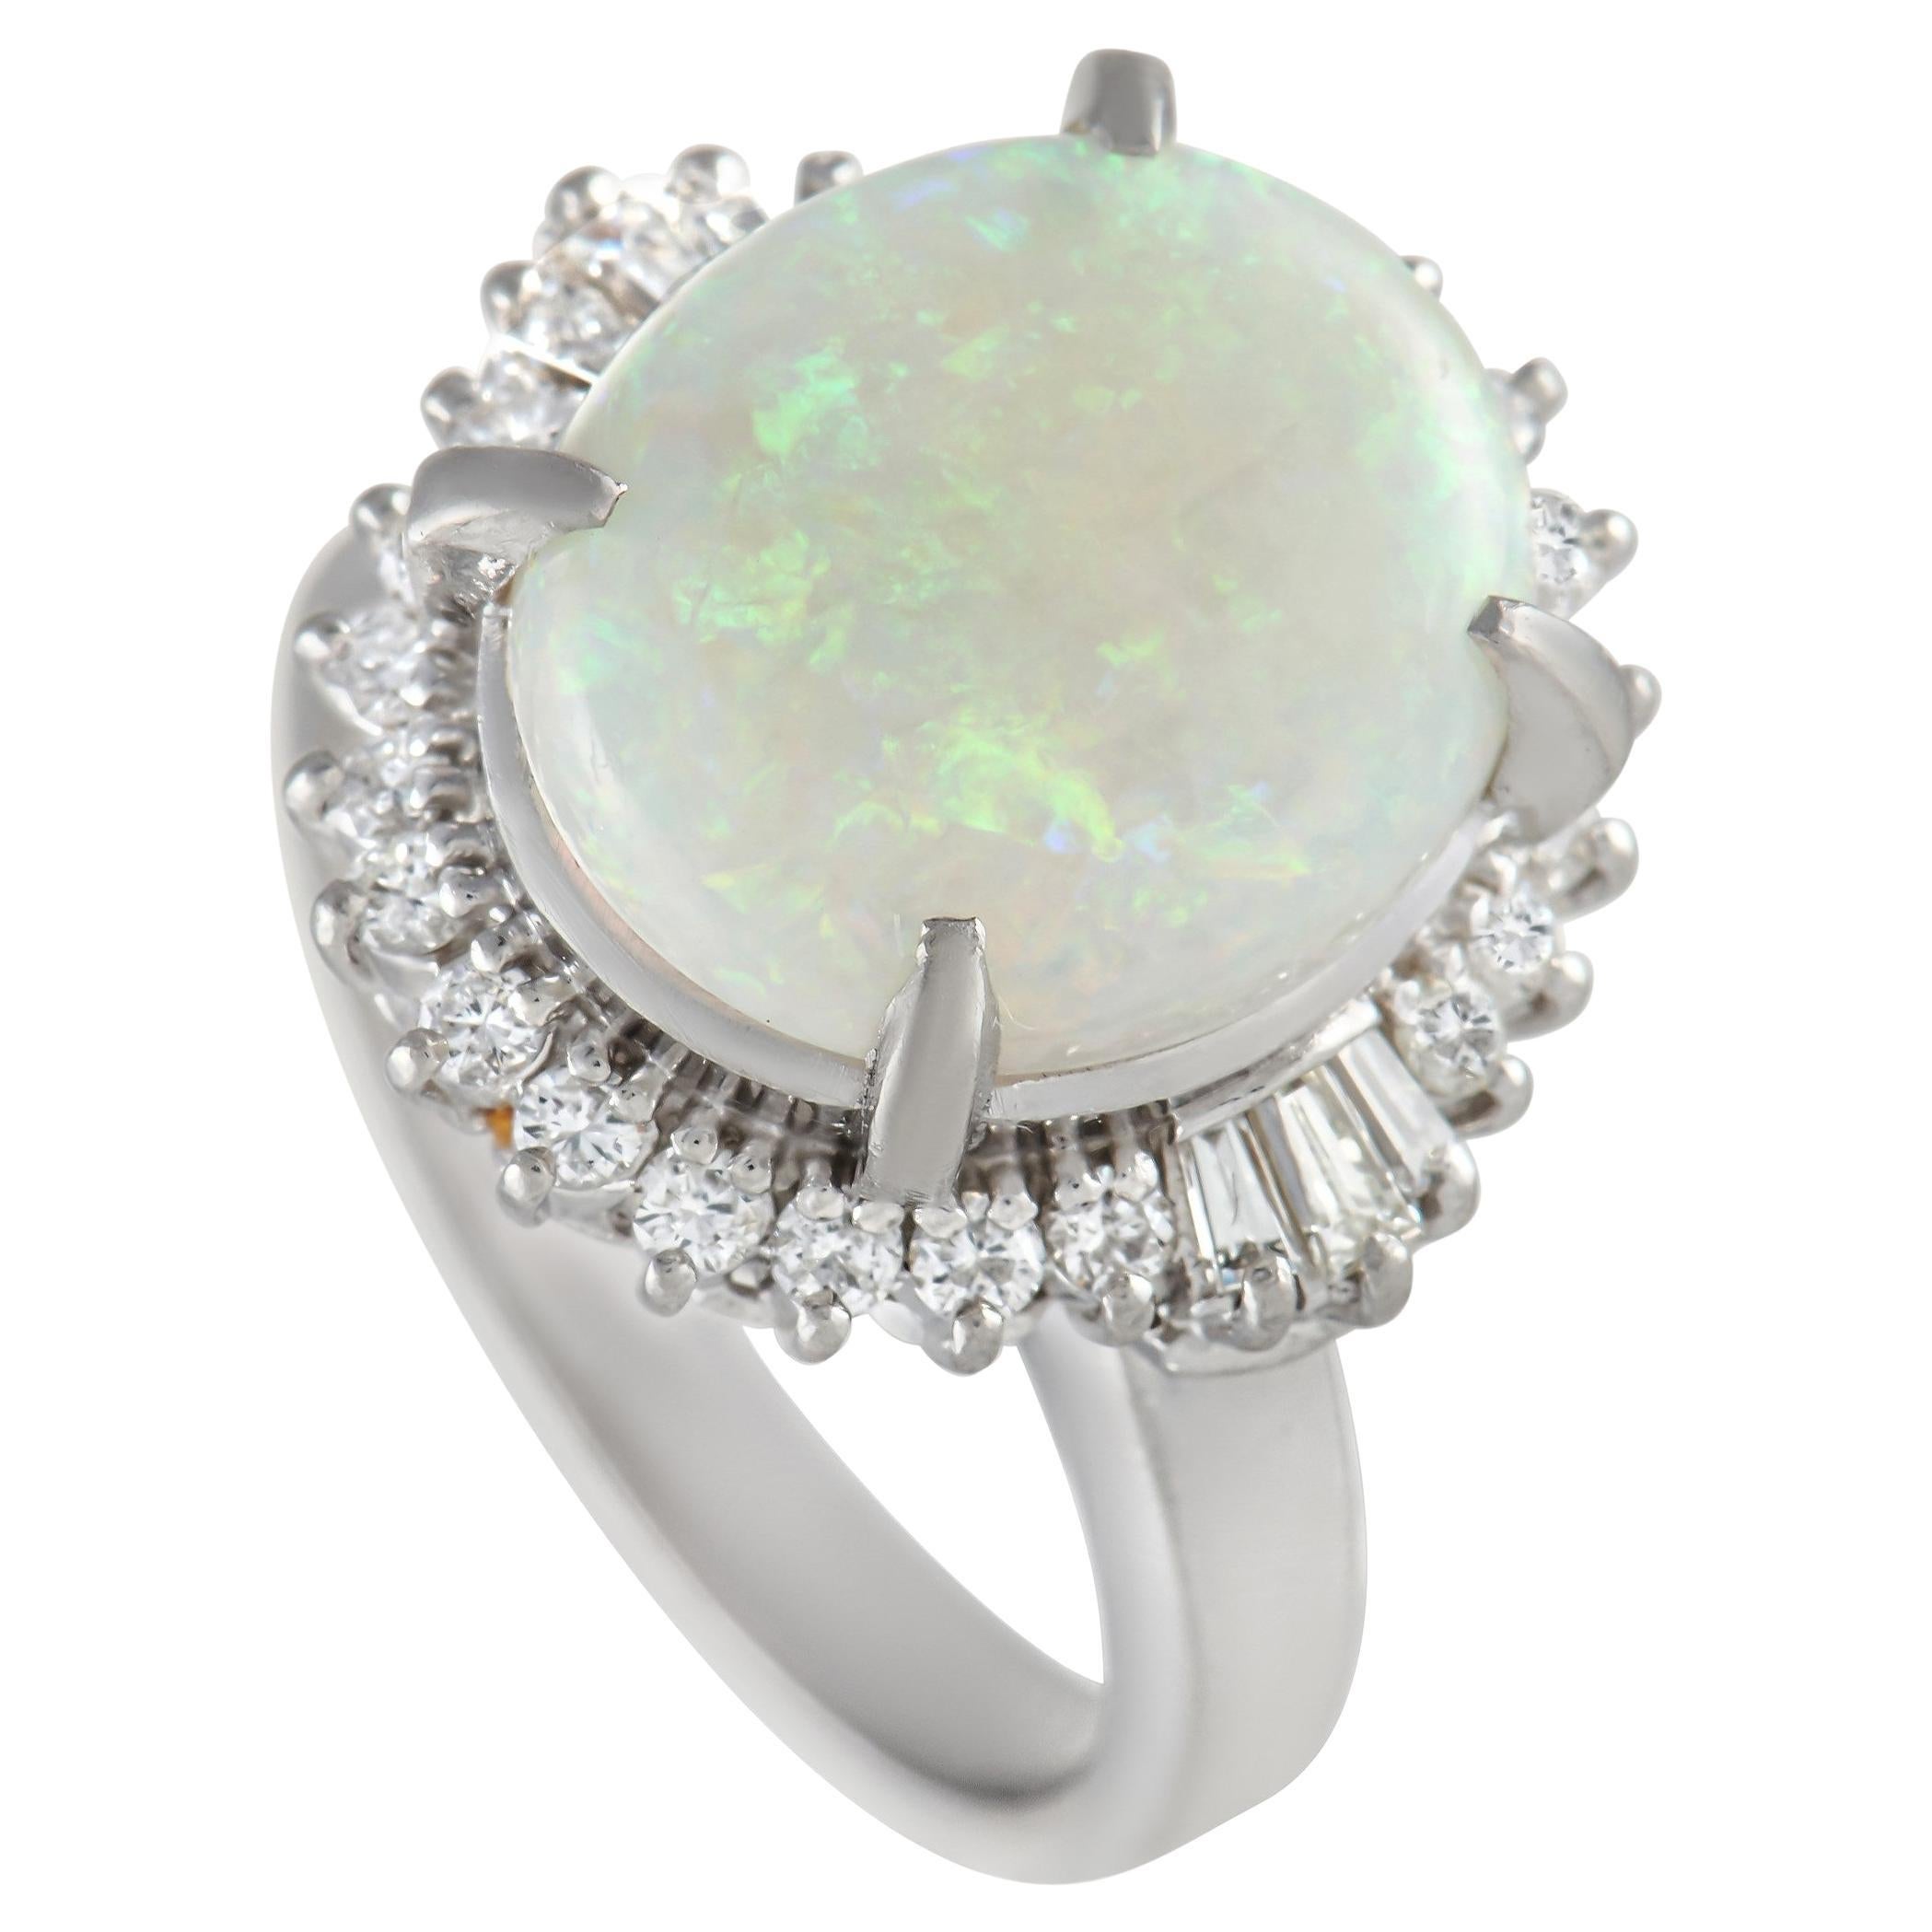 LB Exclusive Platinum 0.57 Ct Diamond and Opal Ring